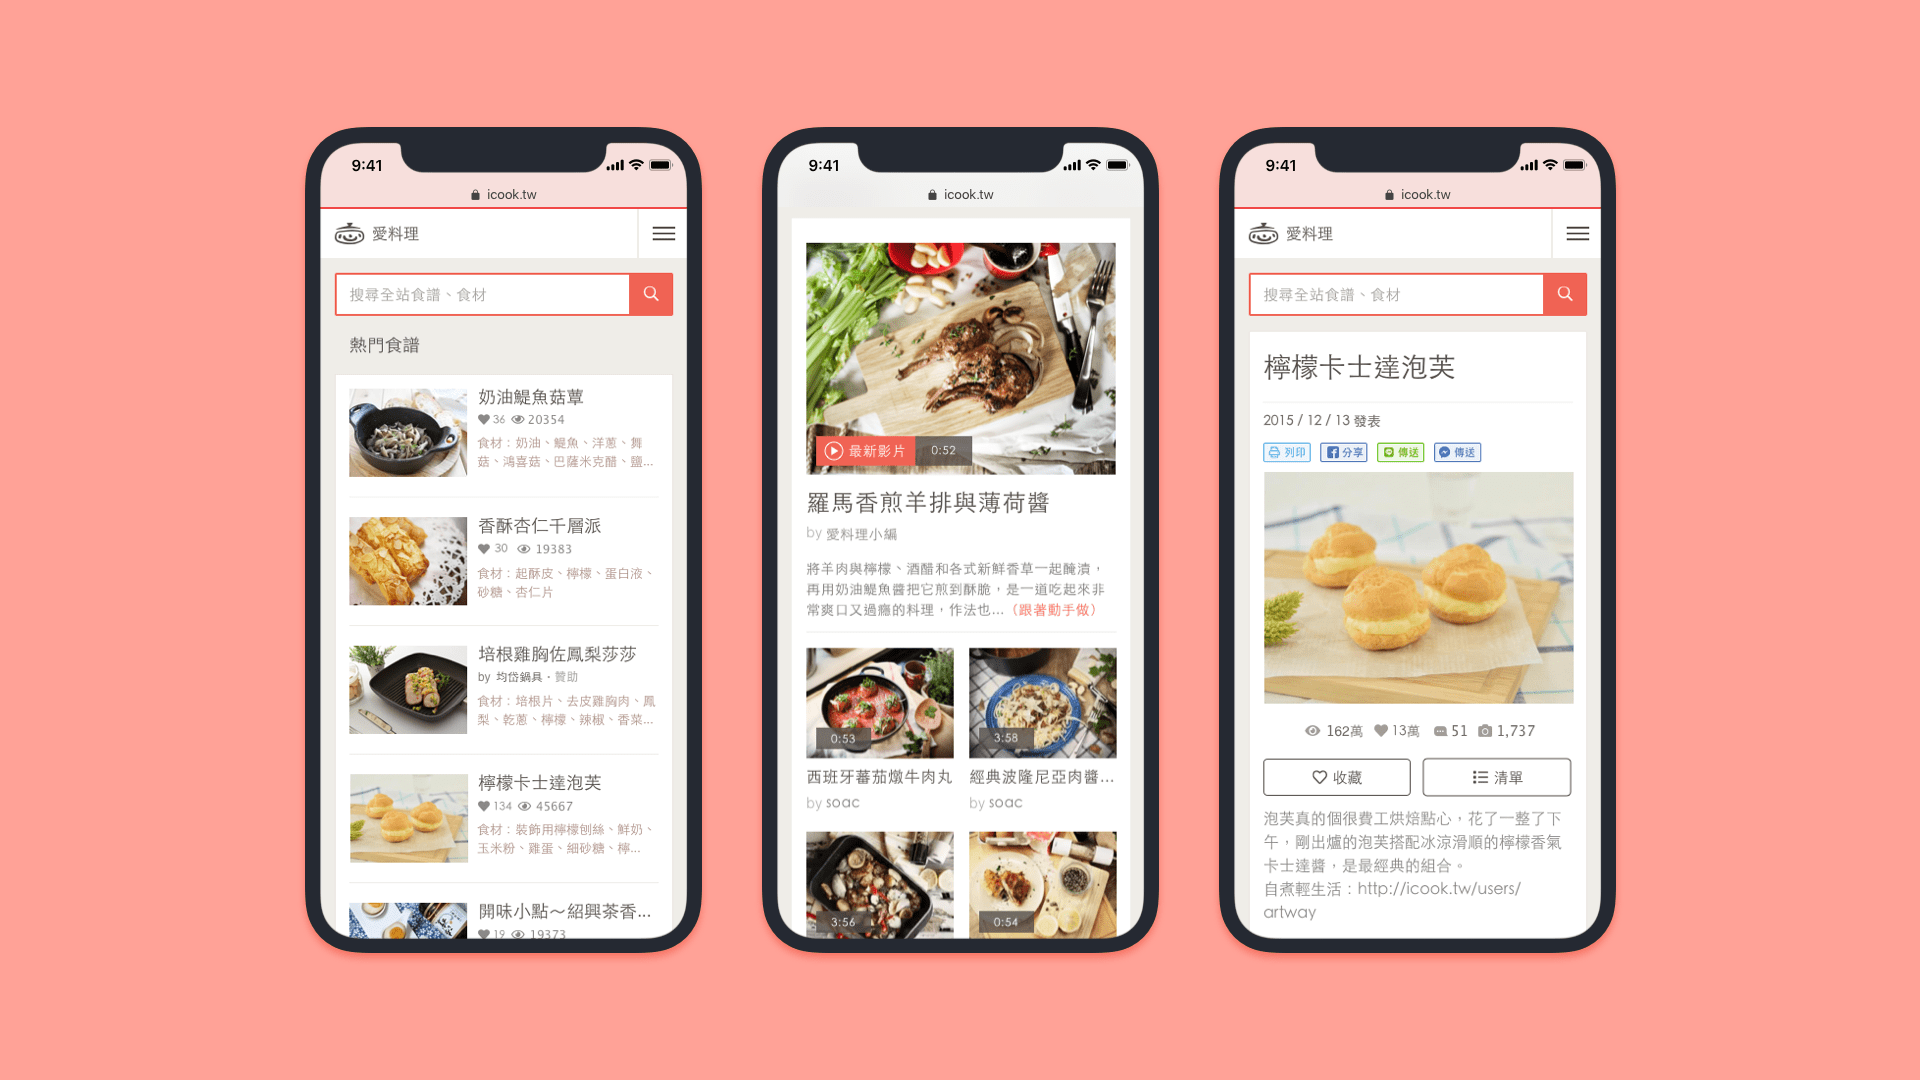 Mobile experience for tailored recipe sharing